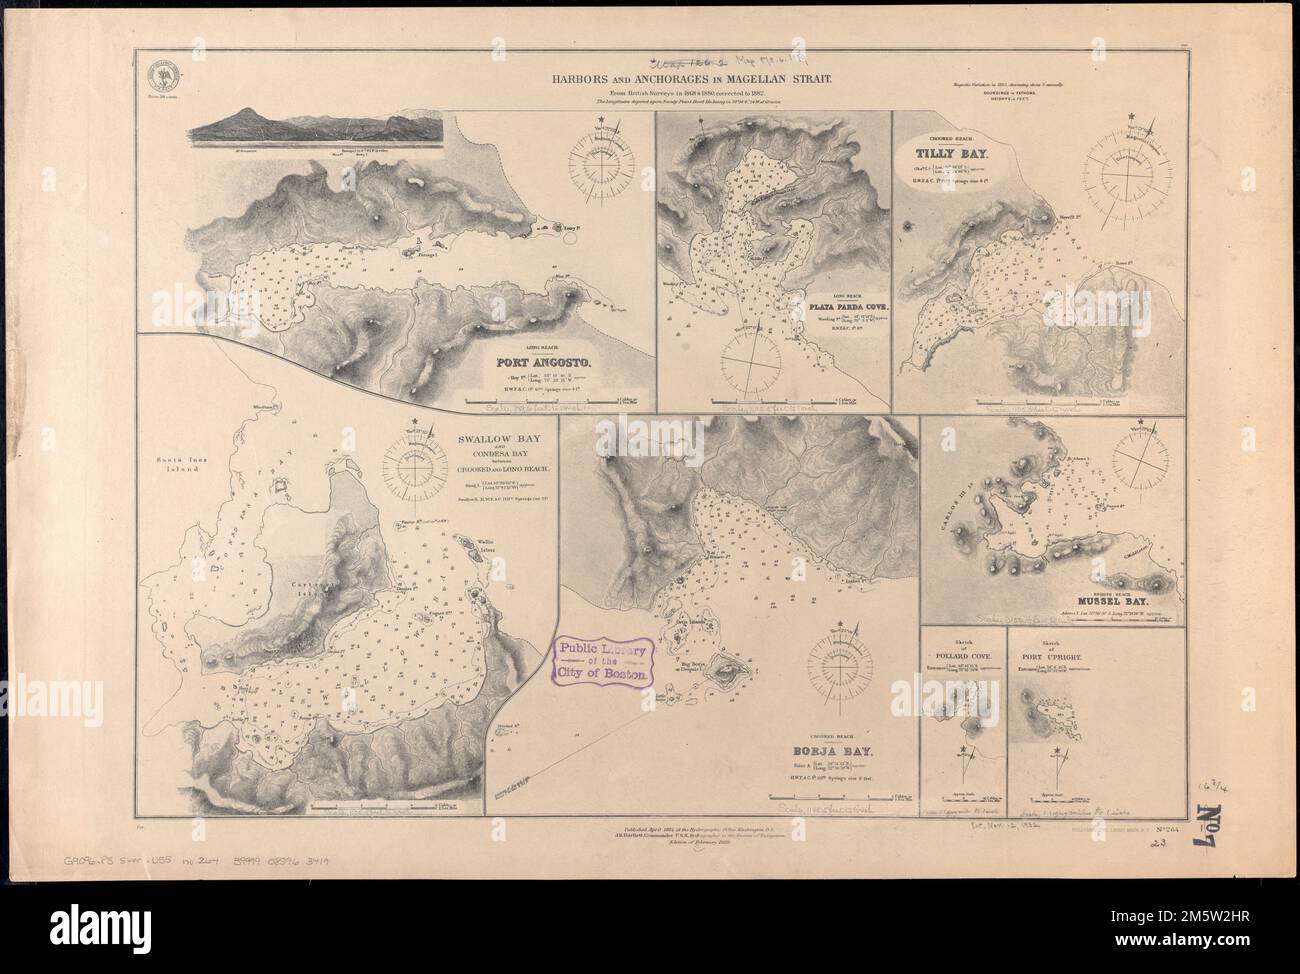 Harbors and anchorages in Magellan Strait : from British surveys in 1868 & 1880, corrected to 1882. Relief shown by hachures and spot heights. Depths shown by soundings and isolines. Includes view of Passage I.... , Magallanes, Estrecho de  ,strait  Chile  , Magallanes y de la Antártica Chilena  ,region   , Angosto, Puerto  ,harbor  Chile  , Magallanes y de la Antártica Chilena  ,region   , Playa Parda, Caleta  ,cofe  Chile  , Magallanes y de la Antártica Chilena  ,region   , Tilly, Bahía  ,cofe  Chile  , Magallanes y de la Antártica Chilena  ,region   , Swallow, Bahía  ,cofe  Chile  , Magalla Stock Photo